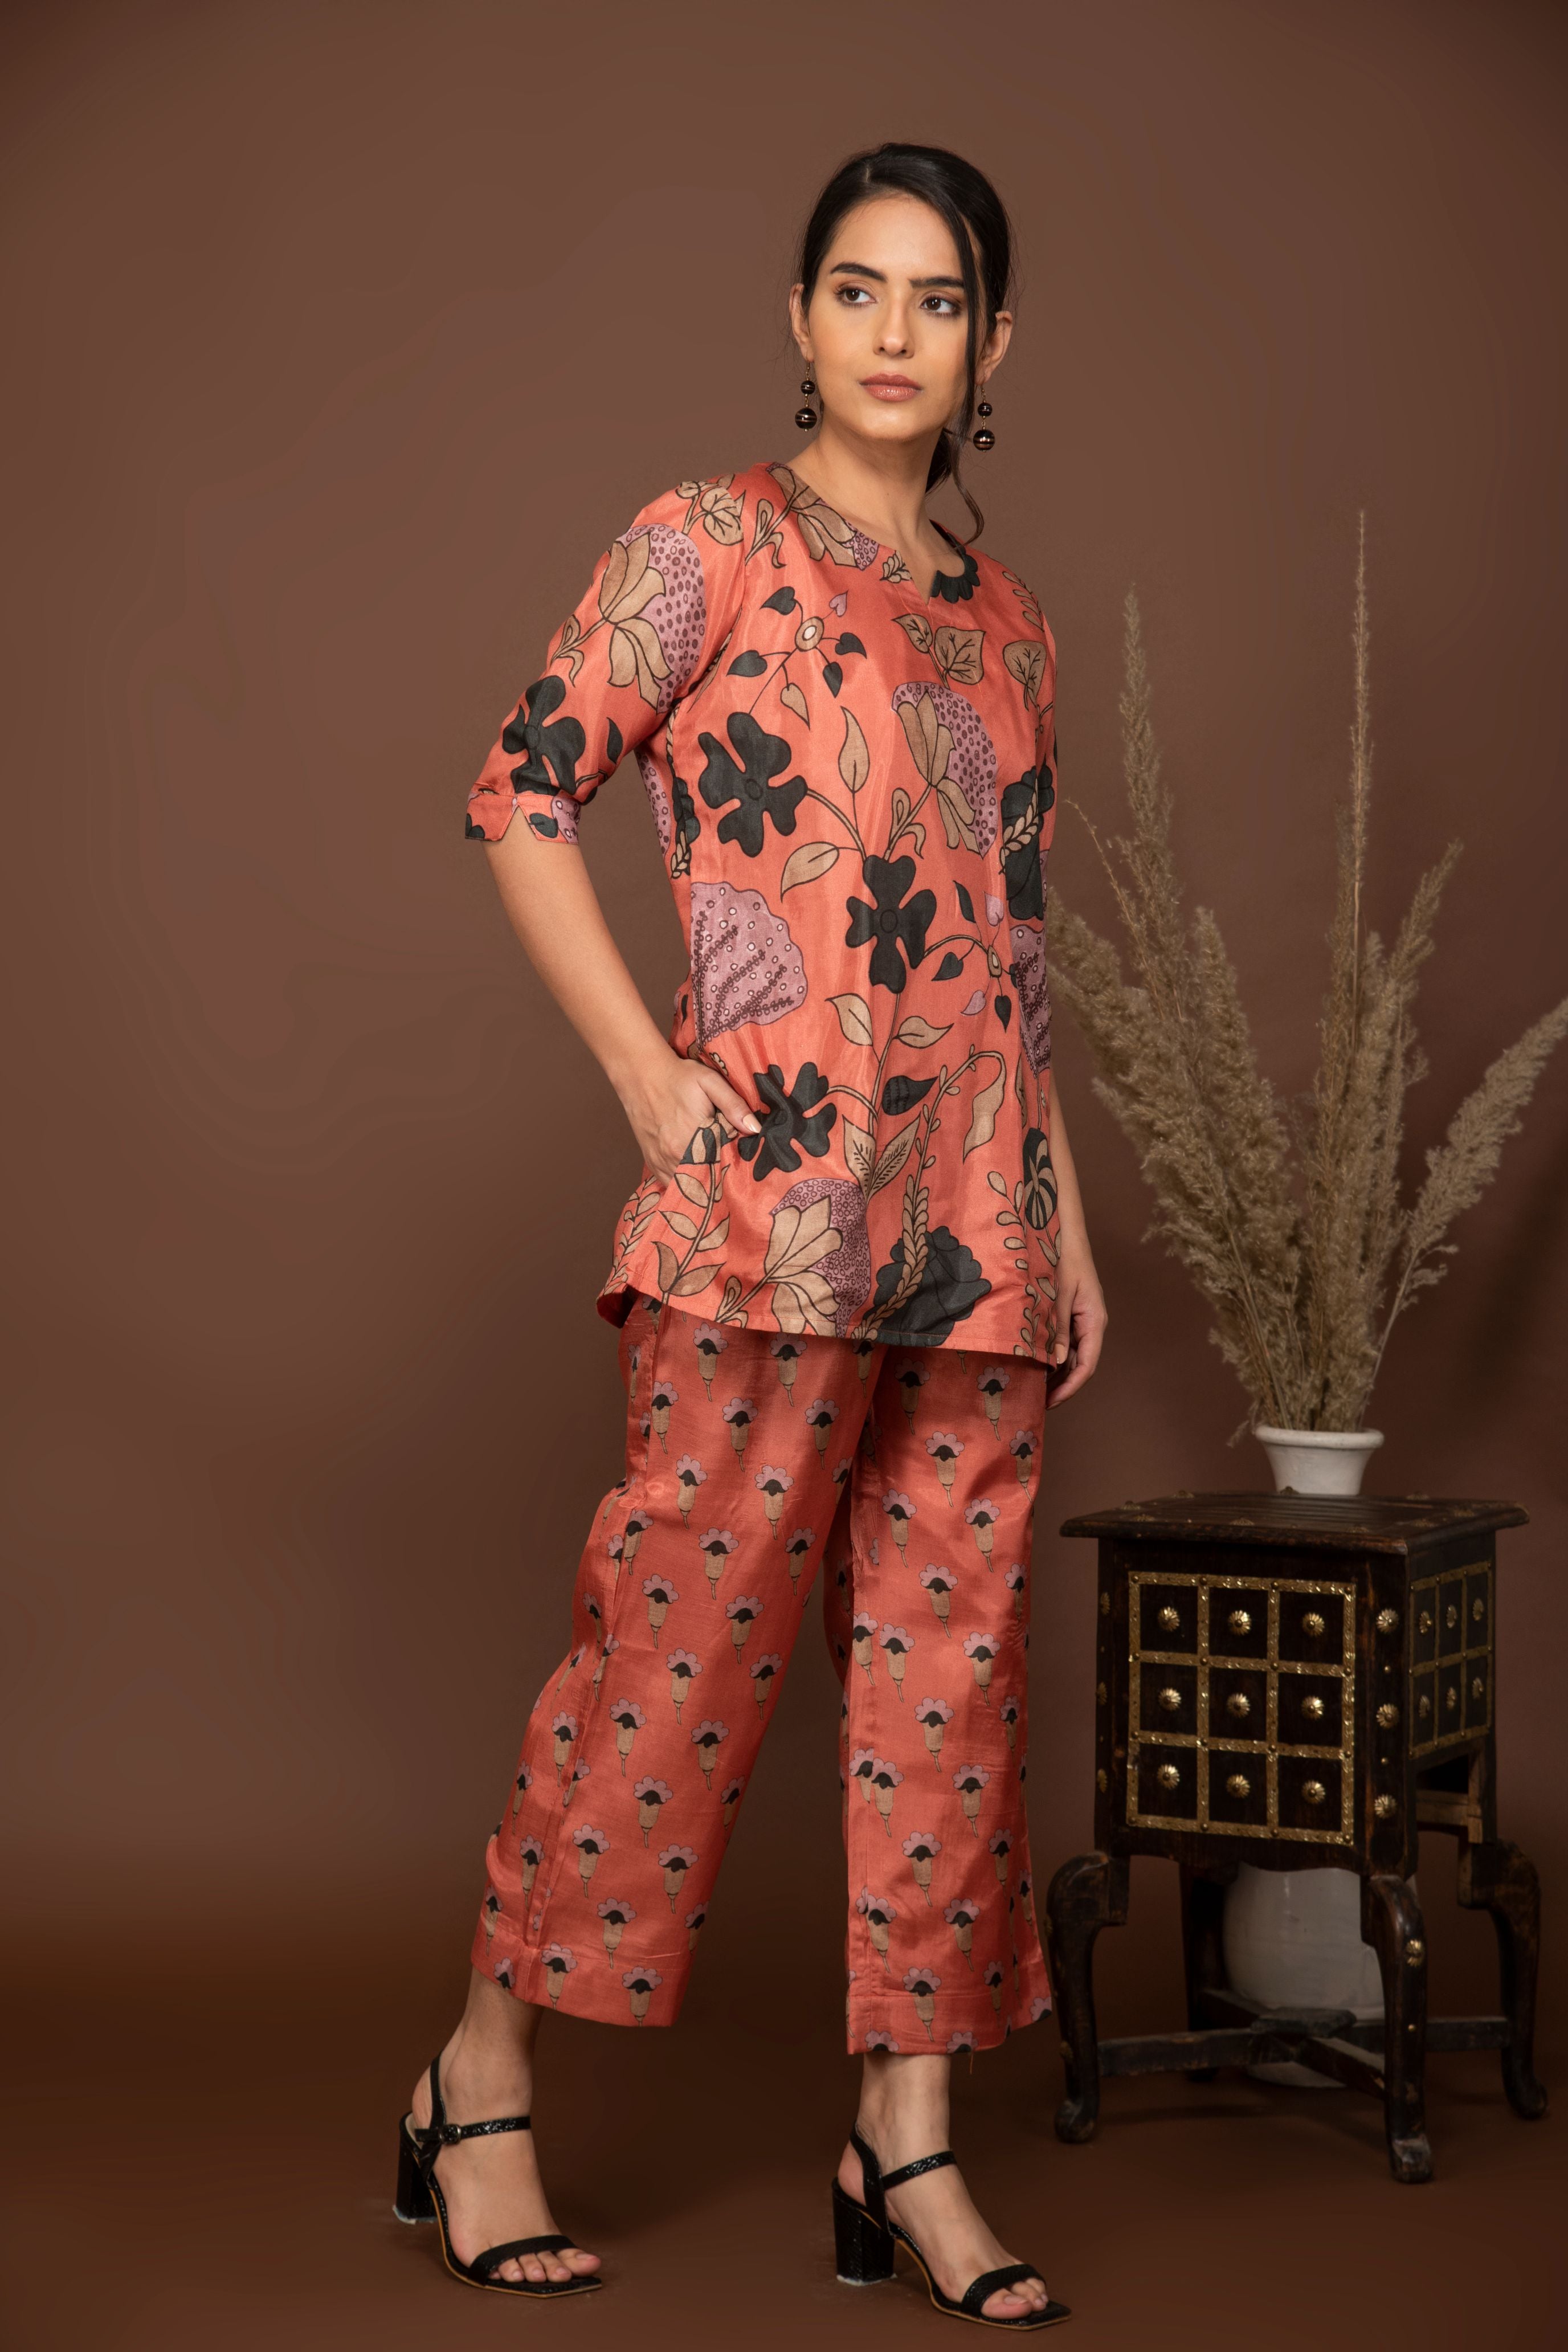 Peach soft muslin with bold flower printed top with butti printed bottom.